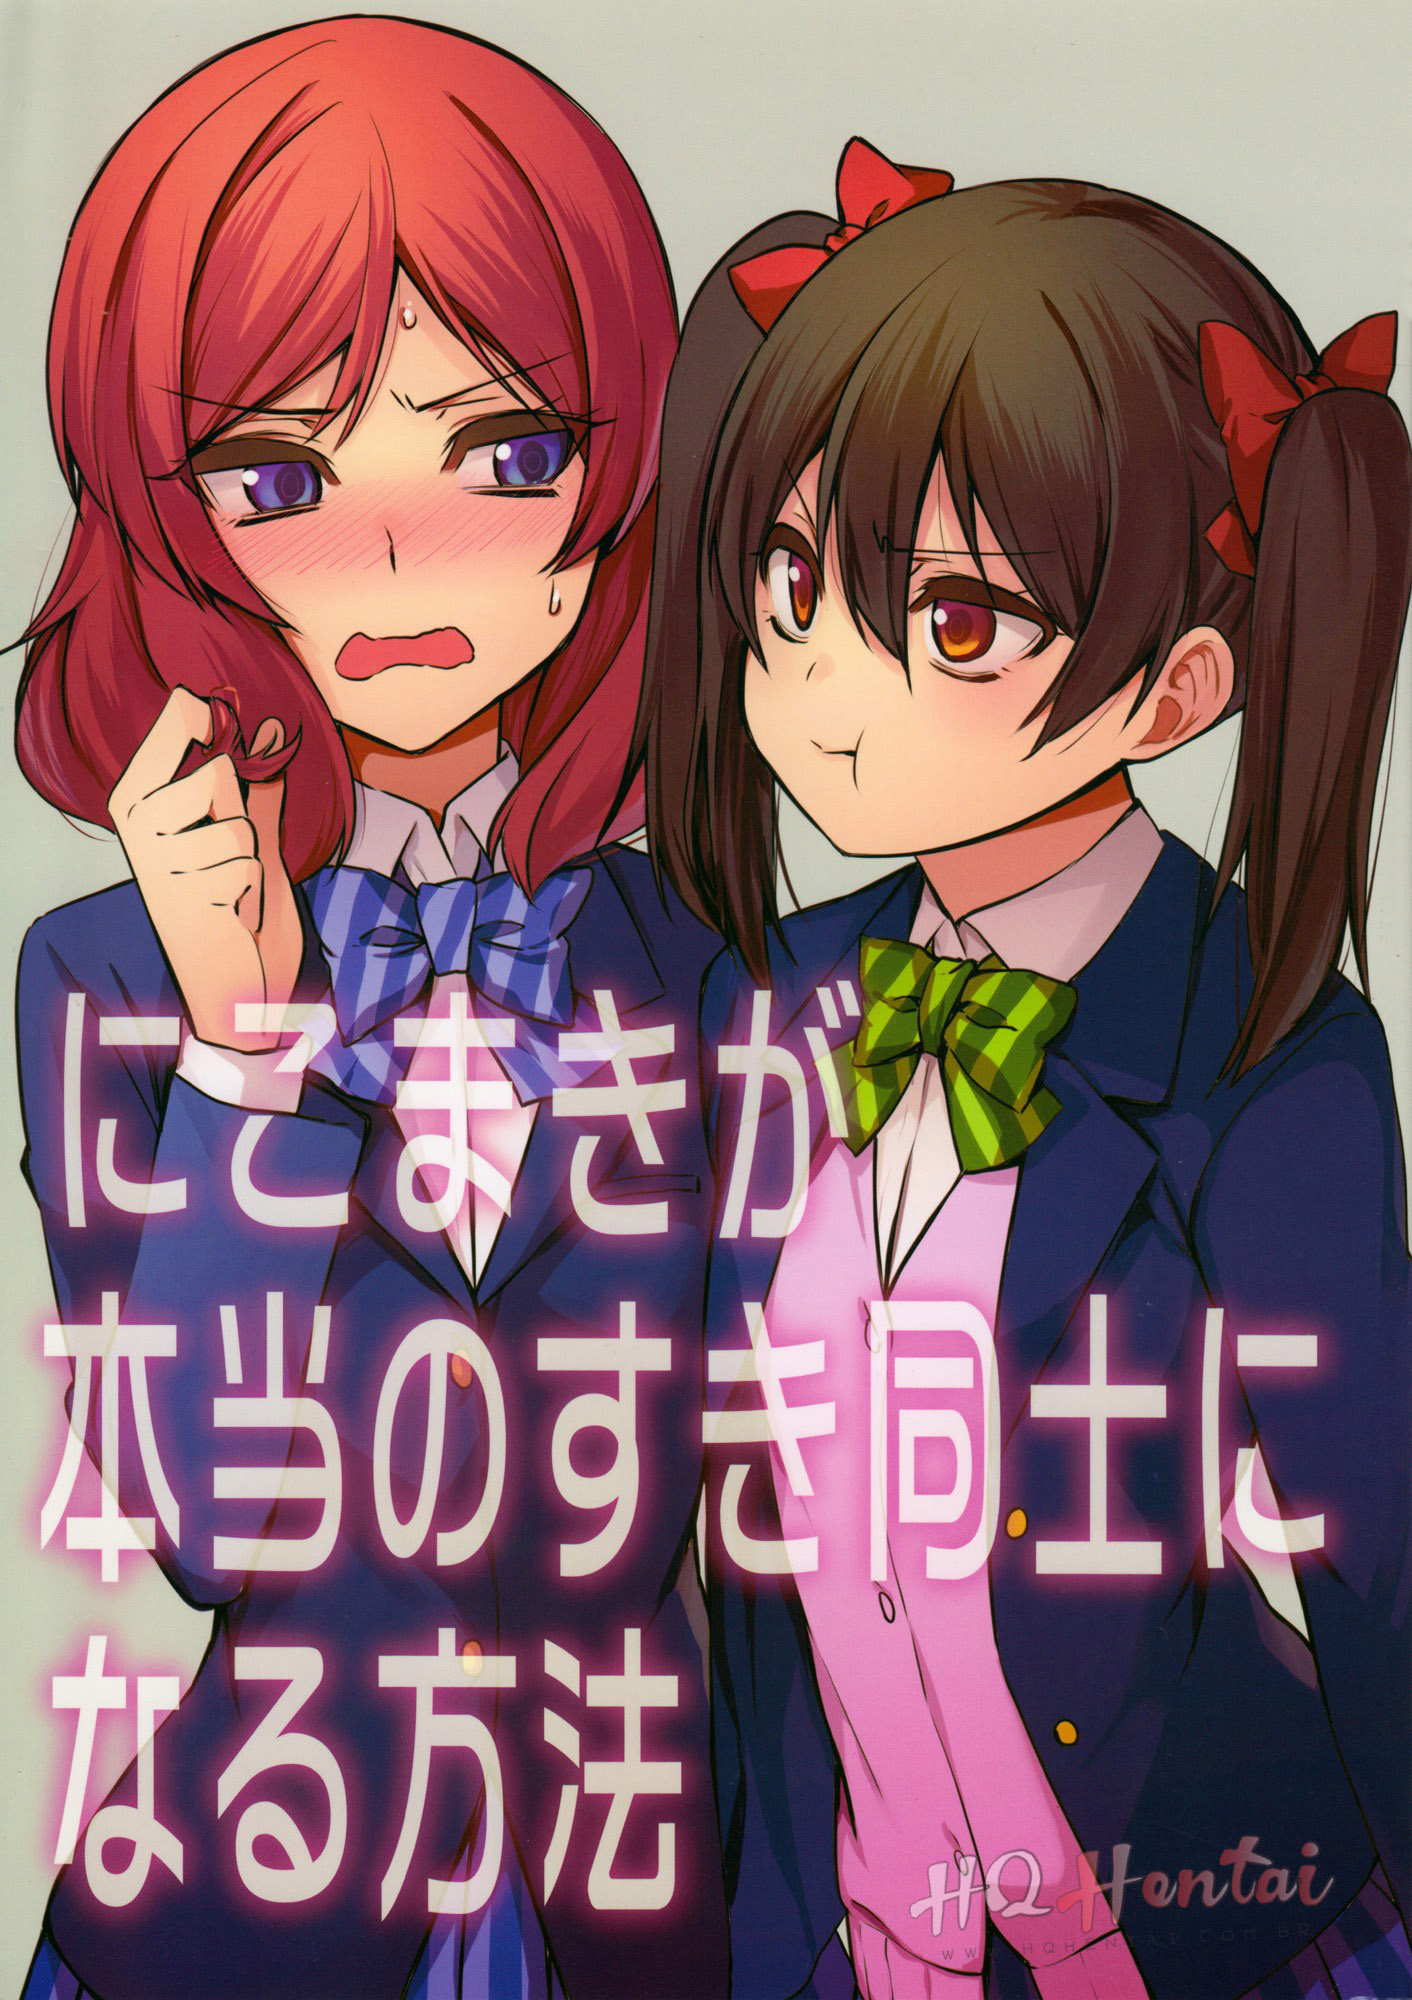 NicoMaki’s Own Way to Truly Express Their Love